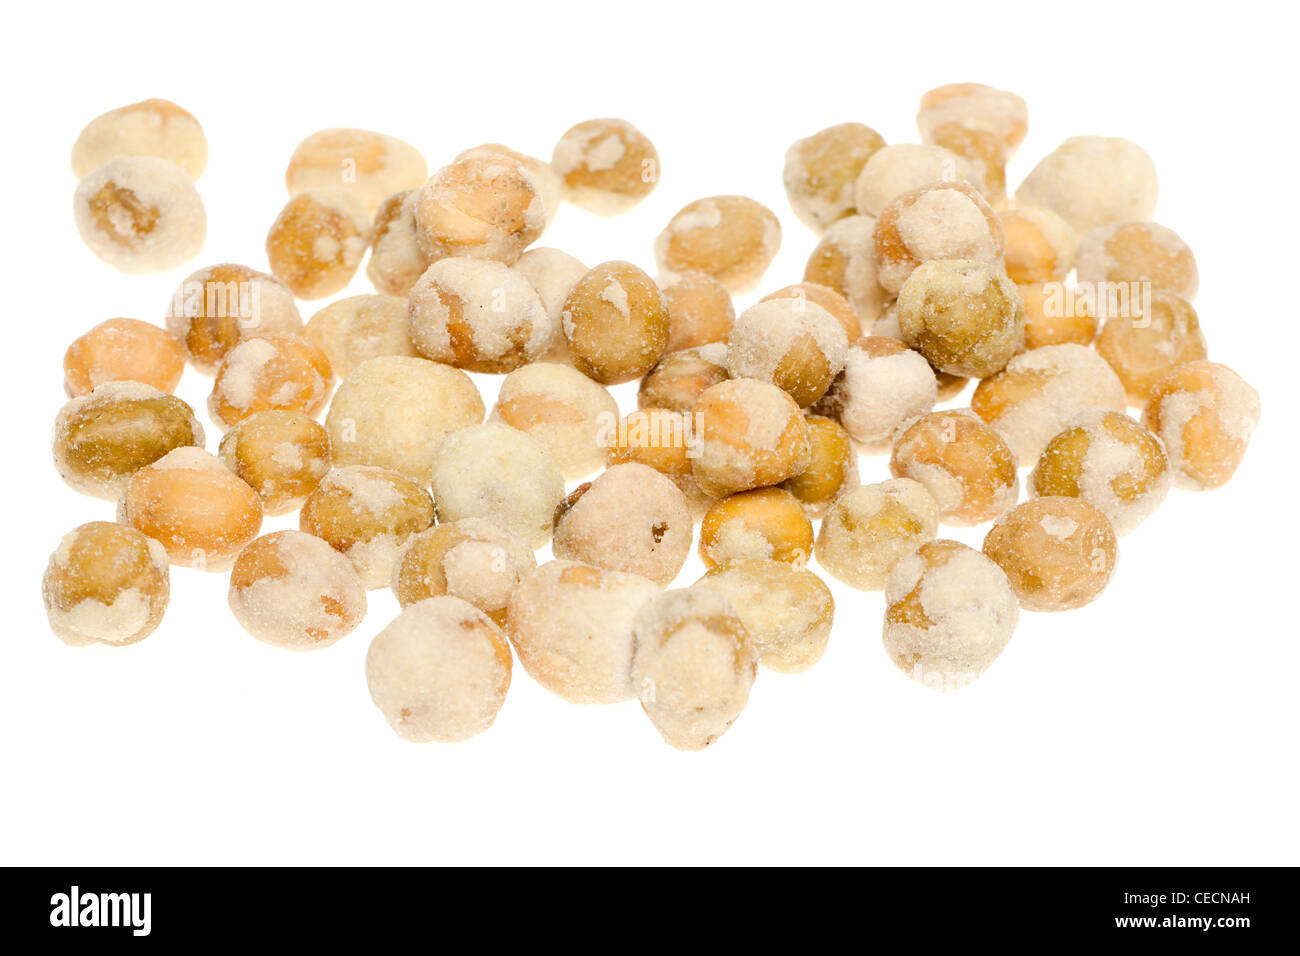 Pile of salted Wasabi peas snack Stock Photo